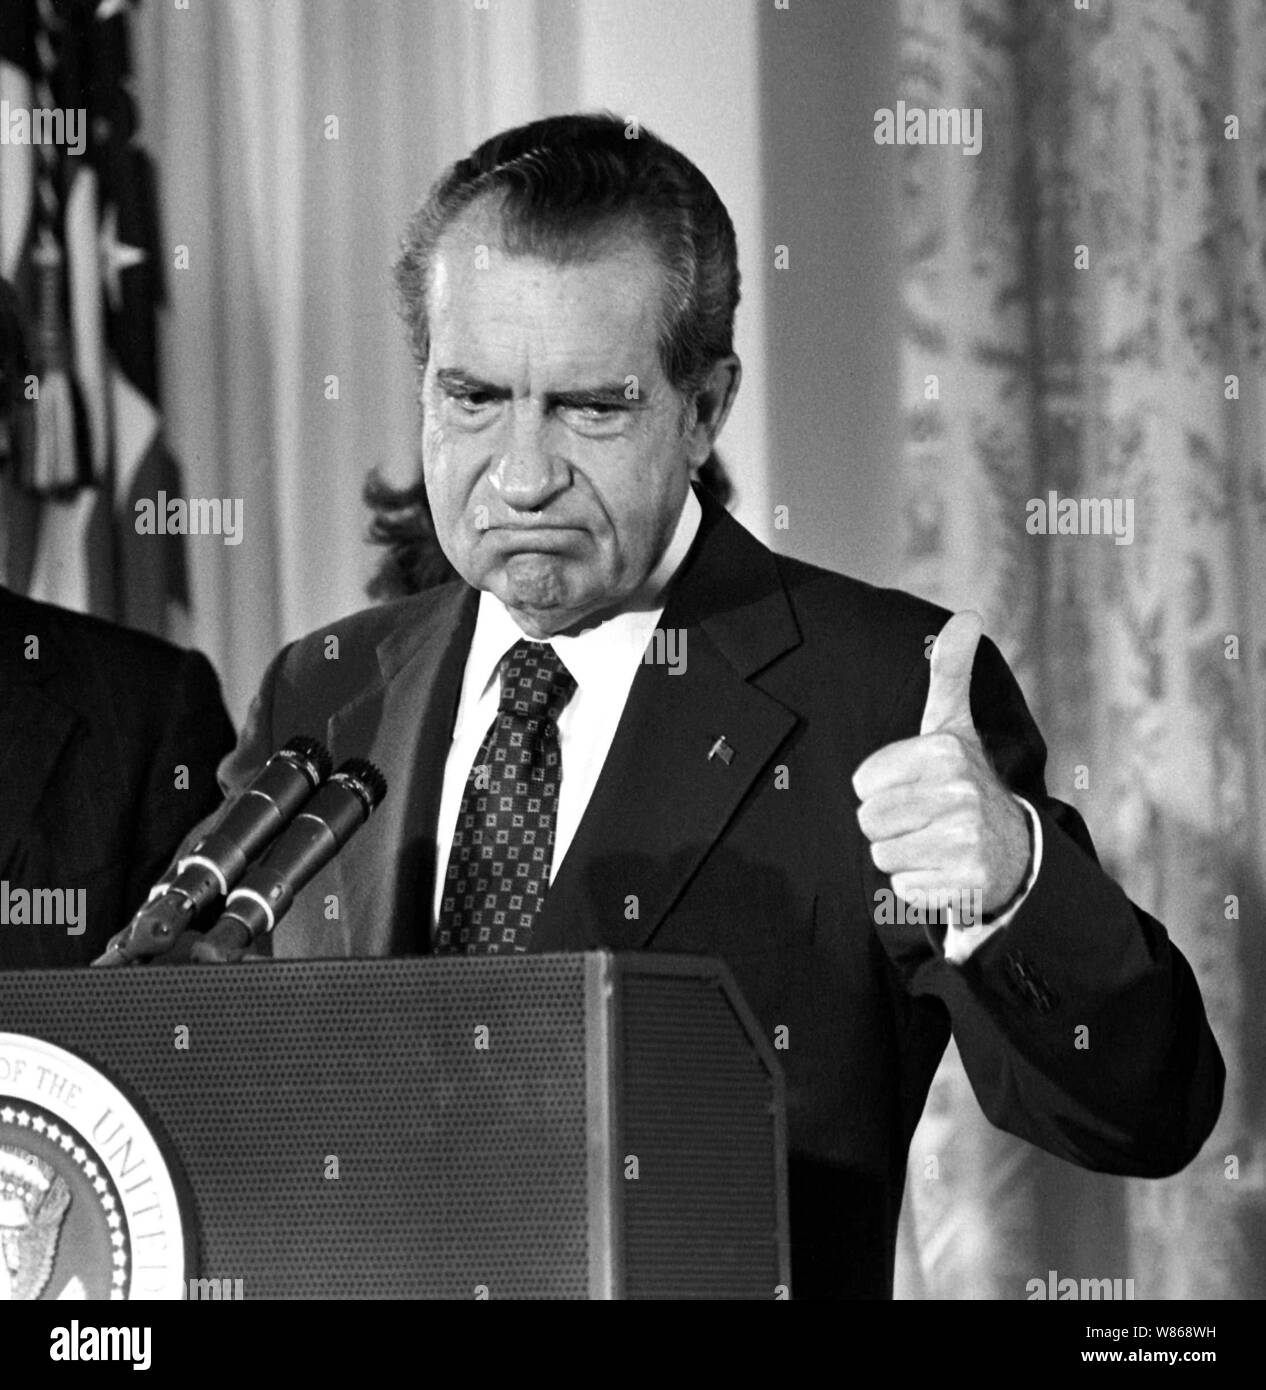 Richard Nixon says goodbye to his co-workers following his resignation on August 9, 1974 in Washington DC. To escape empeachment over the Watergate affair, Nixon is the first American president to step down from office. | usage worldwide Stock Photo